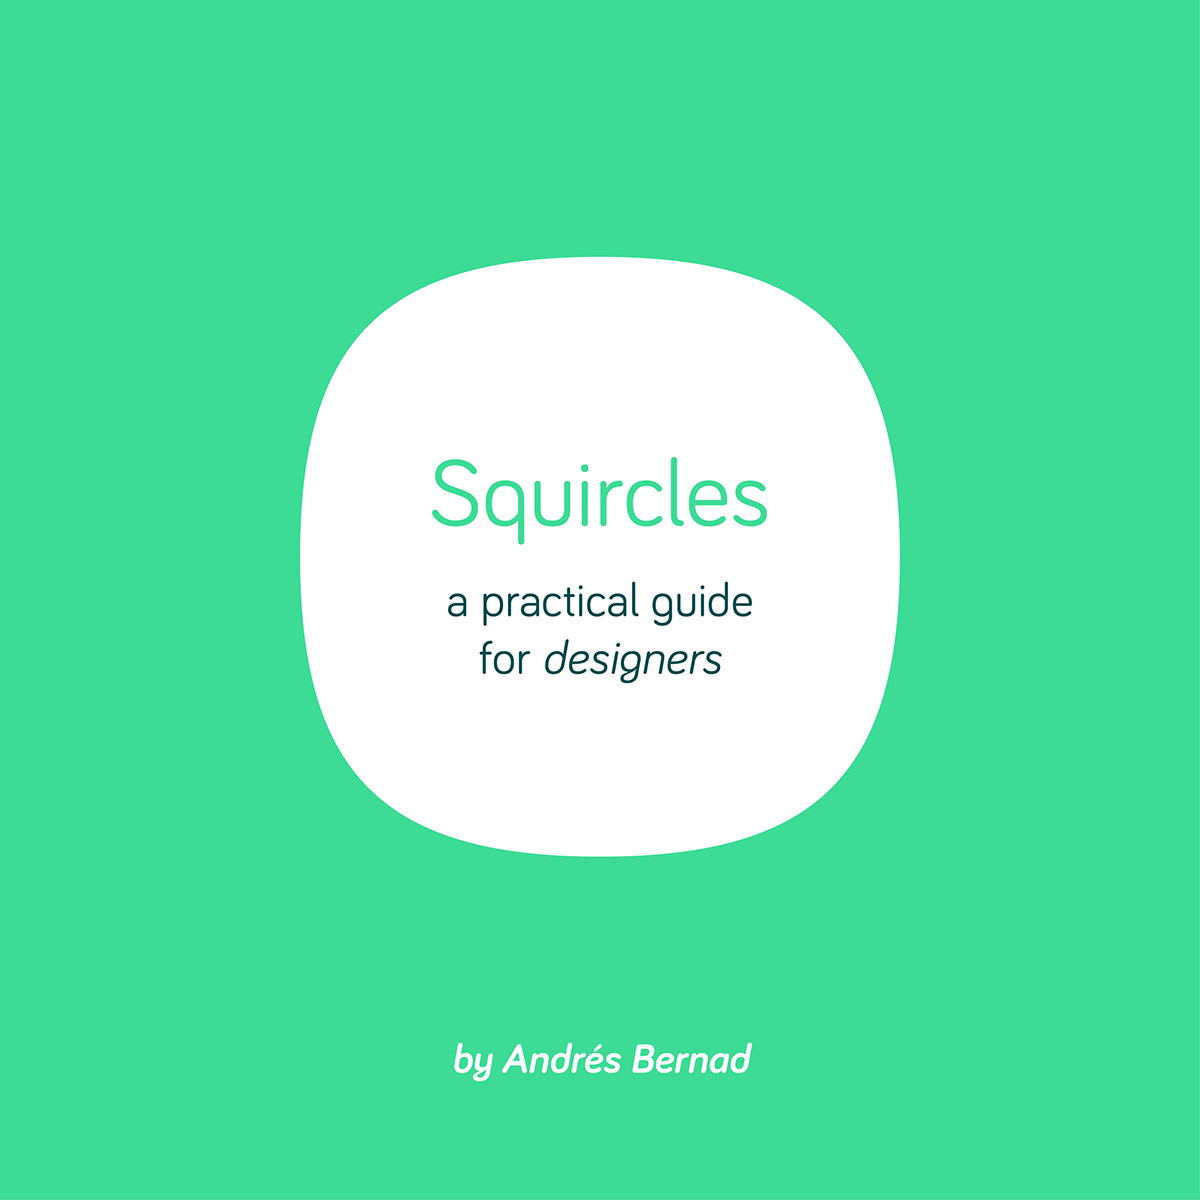 squircles circles squares geometry Minimalism simplicity Geometrical apple NEW DESIGN symmetry squircle